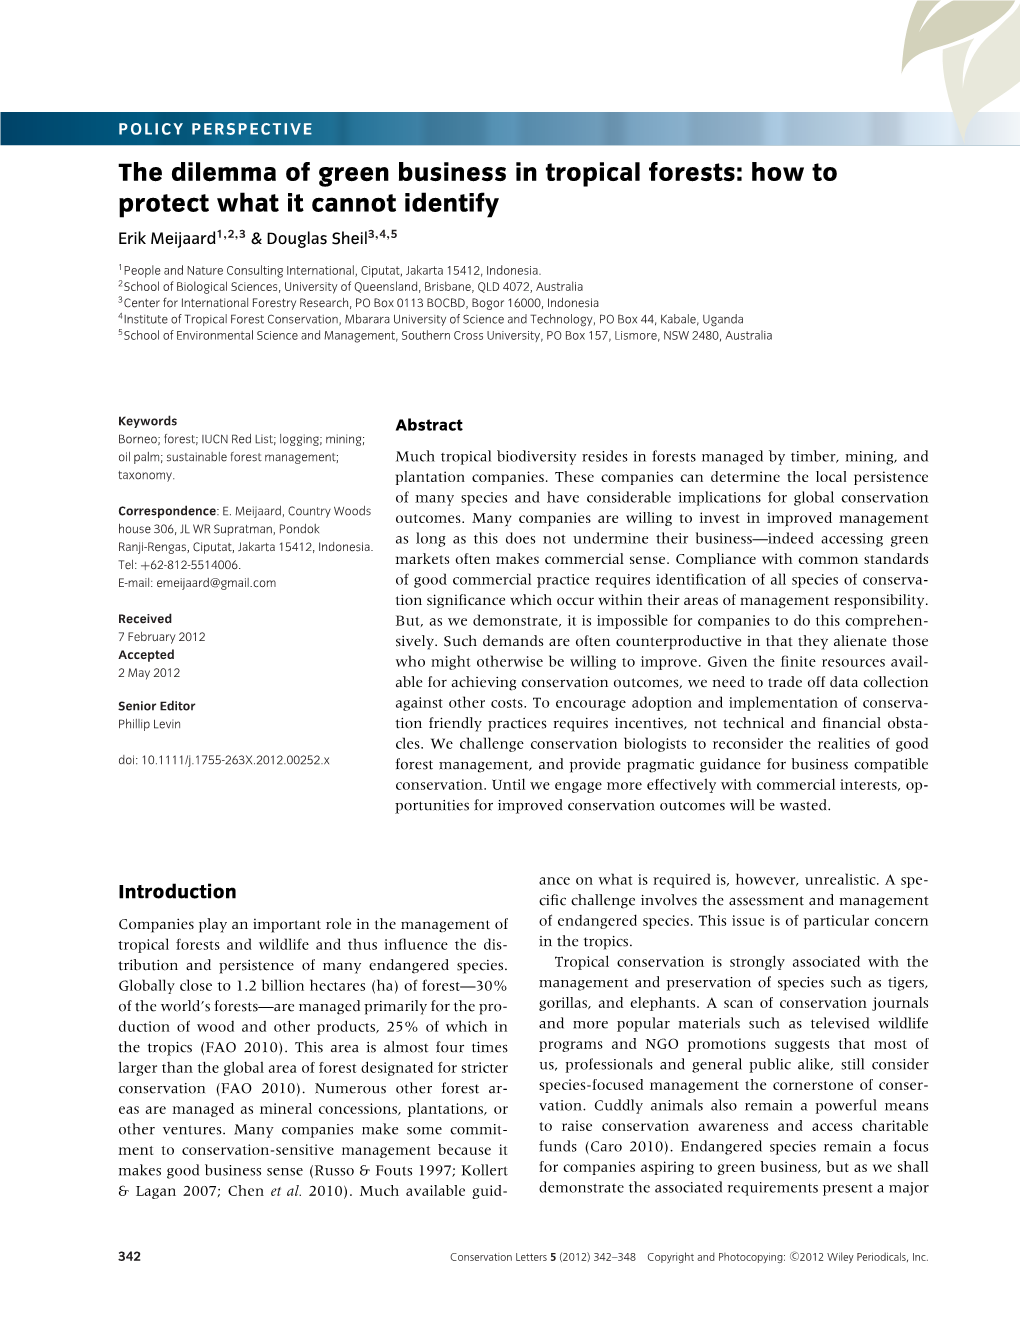 The Dilemma of Green Business in Tropical Forests: How to Protect What It Cannot Identify Erik Meijaard1,2,3 & Douglas Sheil3,4,5